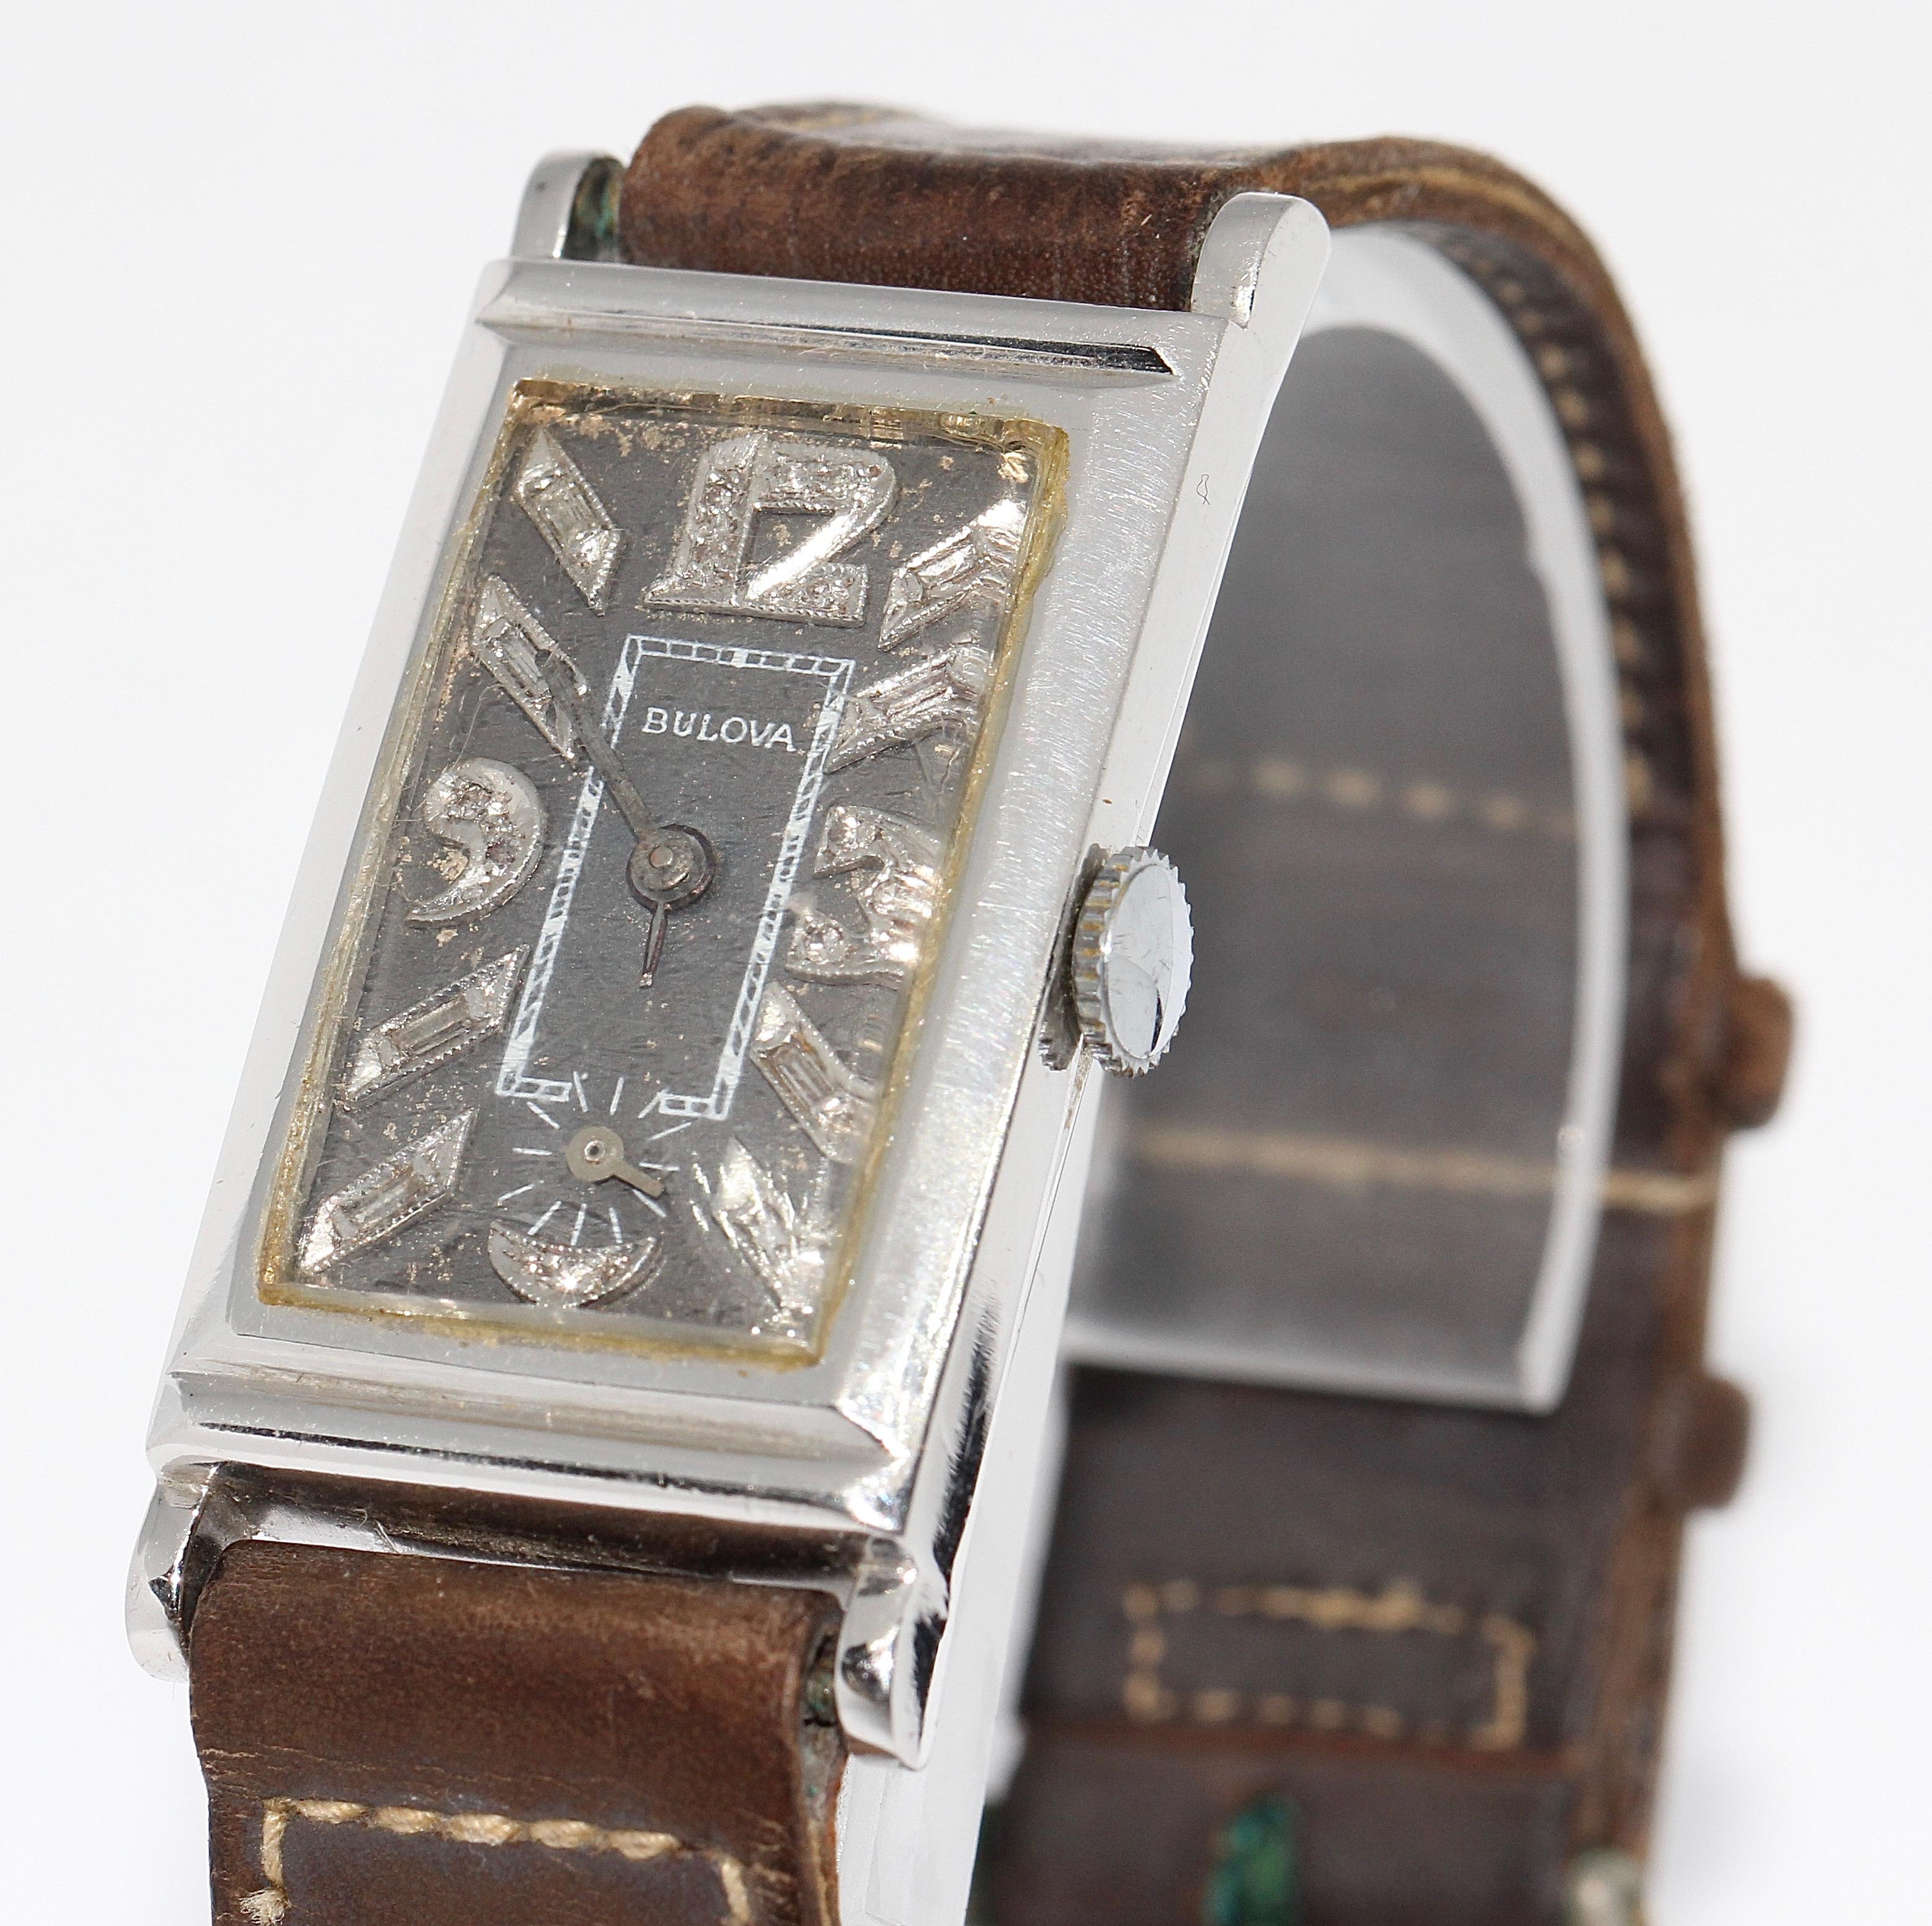 Art Deco Bulova Platinum Doctors Wrist Watch with Diamond dial.

The watch comes with a certificate of authenticity.